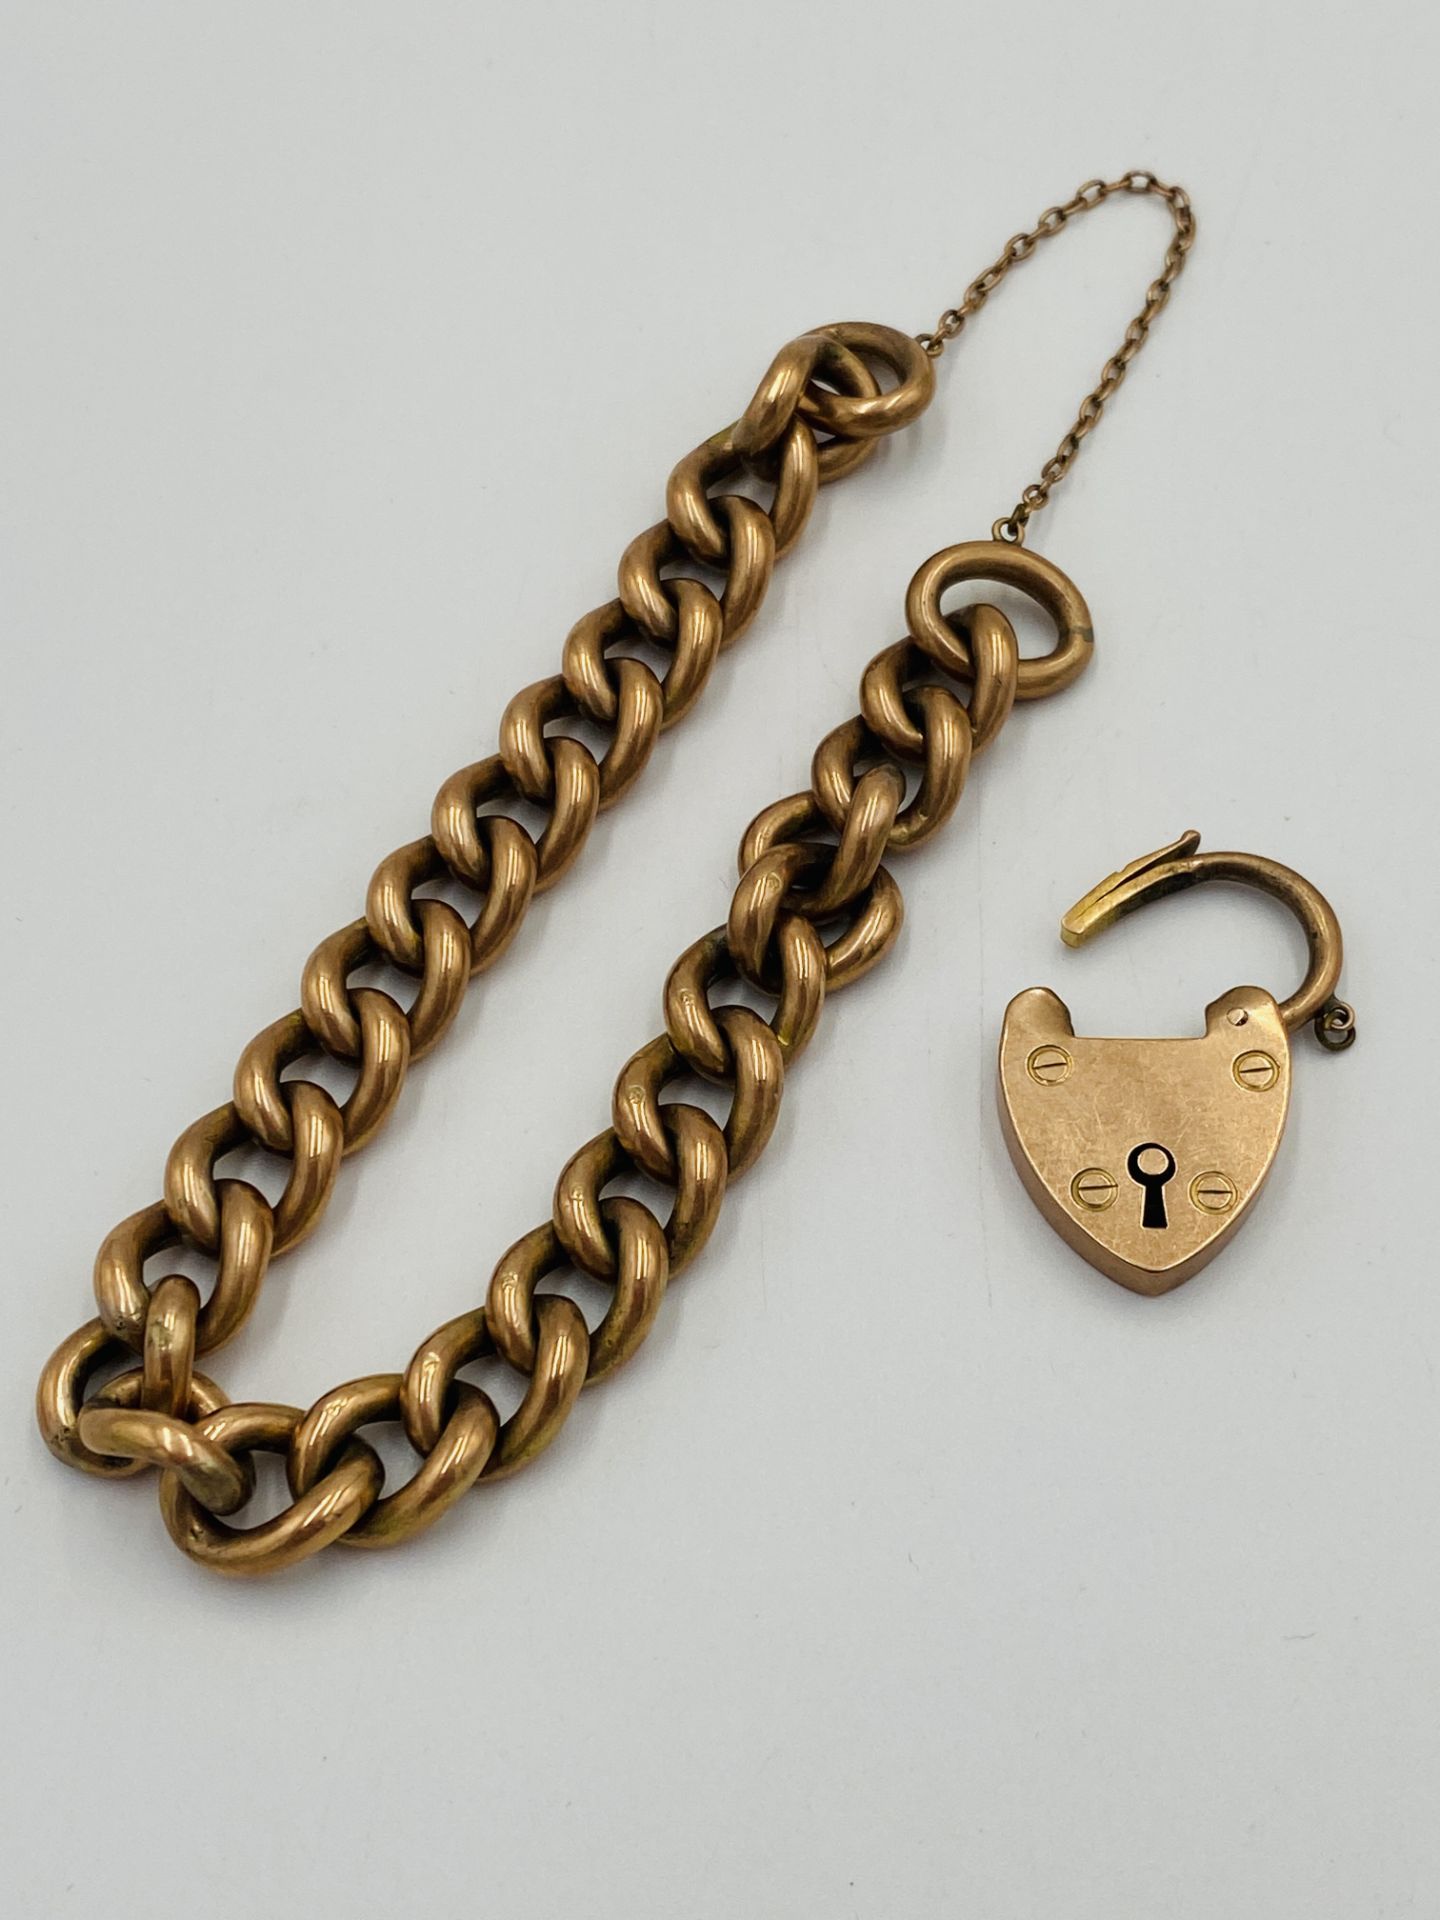 9ct gold bracelet with 9ct gold padlock charm - Image 2 of 4